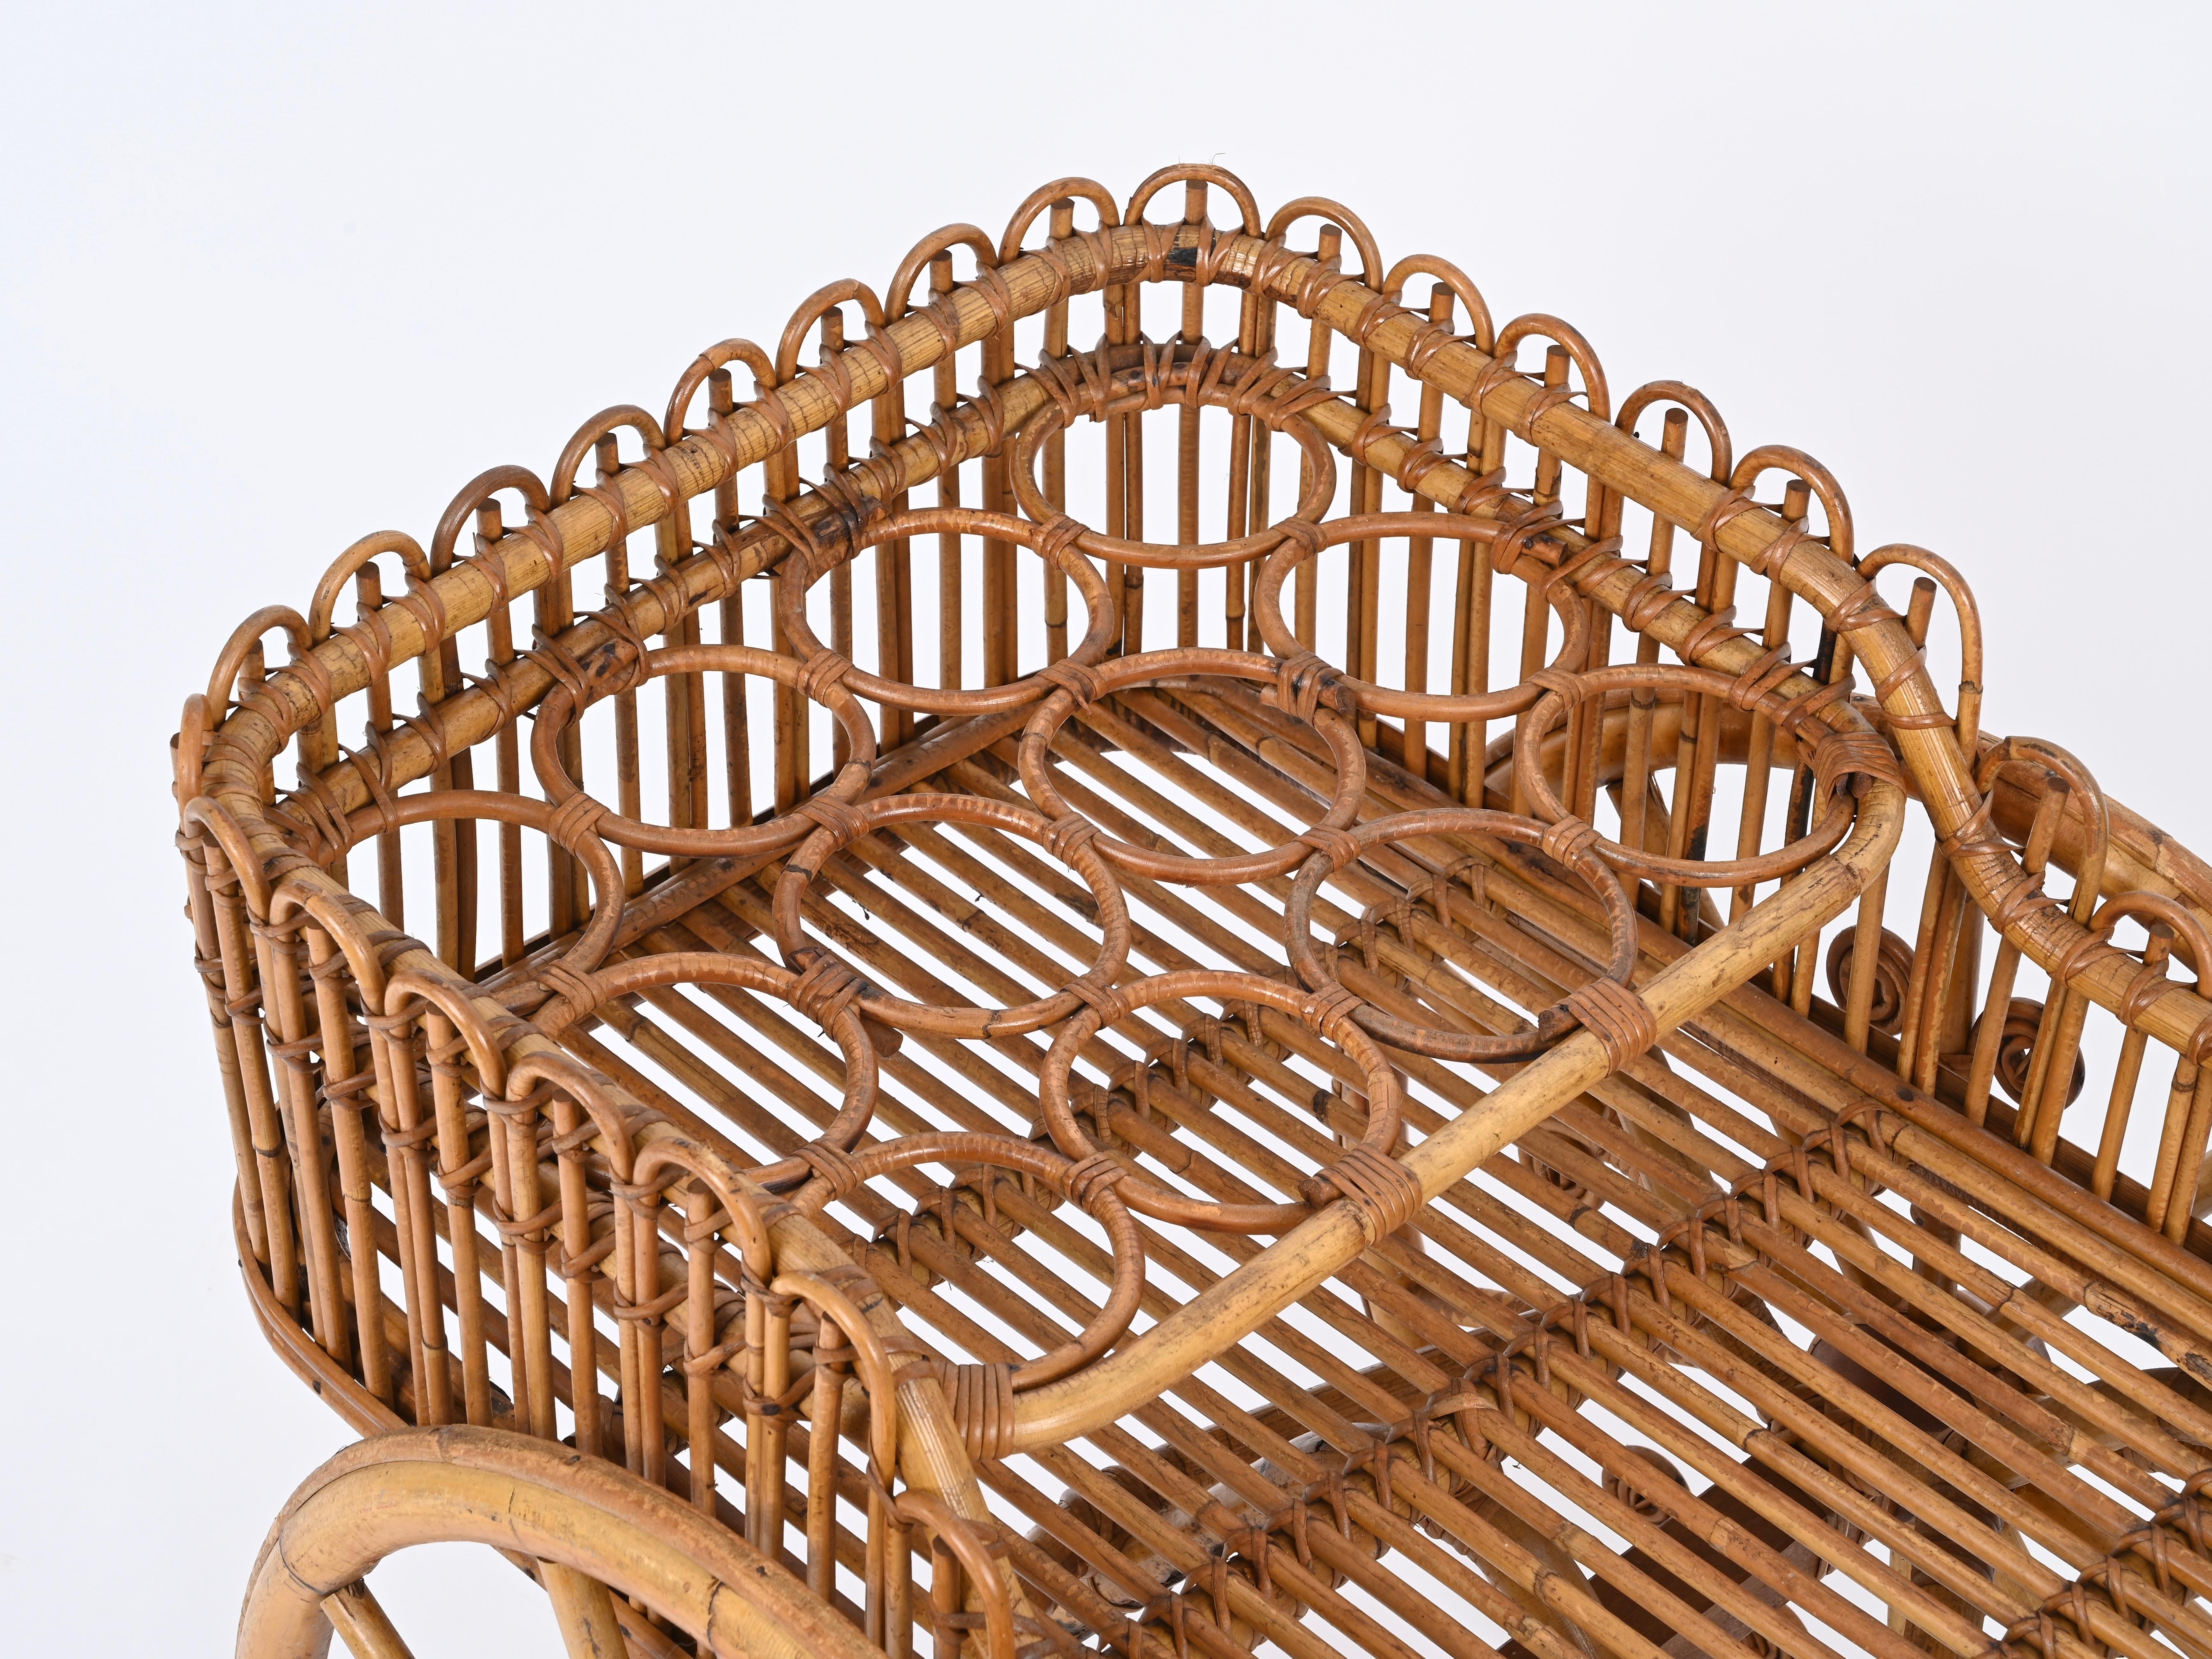 Hand-Woven French Riviera Serving Bar Cart in Rattan, Bamboo and Wicker, Italy 1960s For Sale